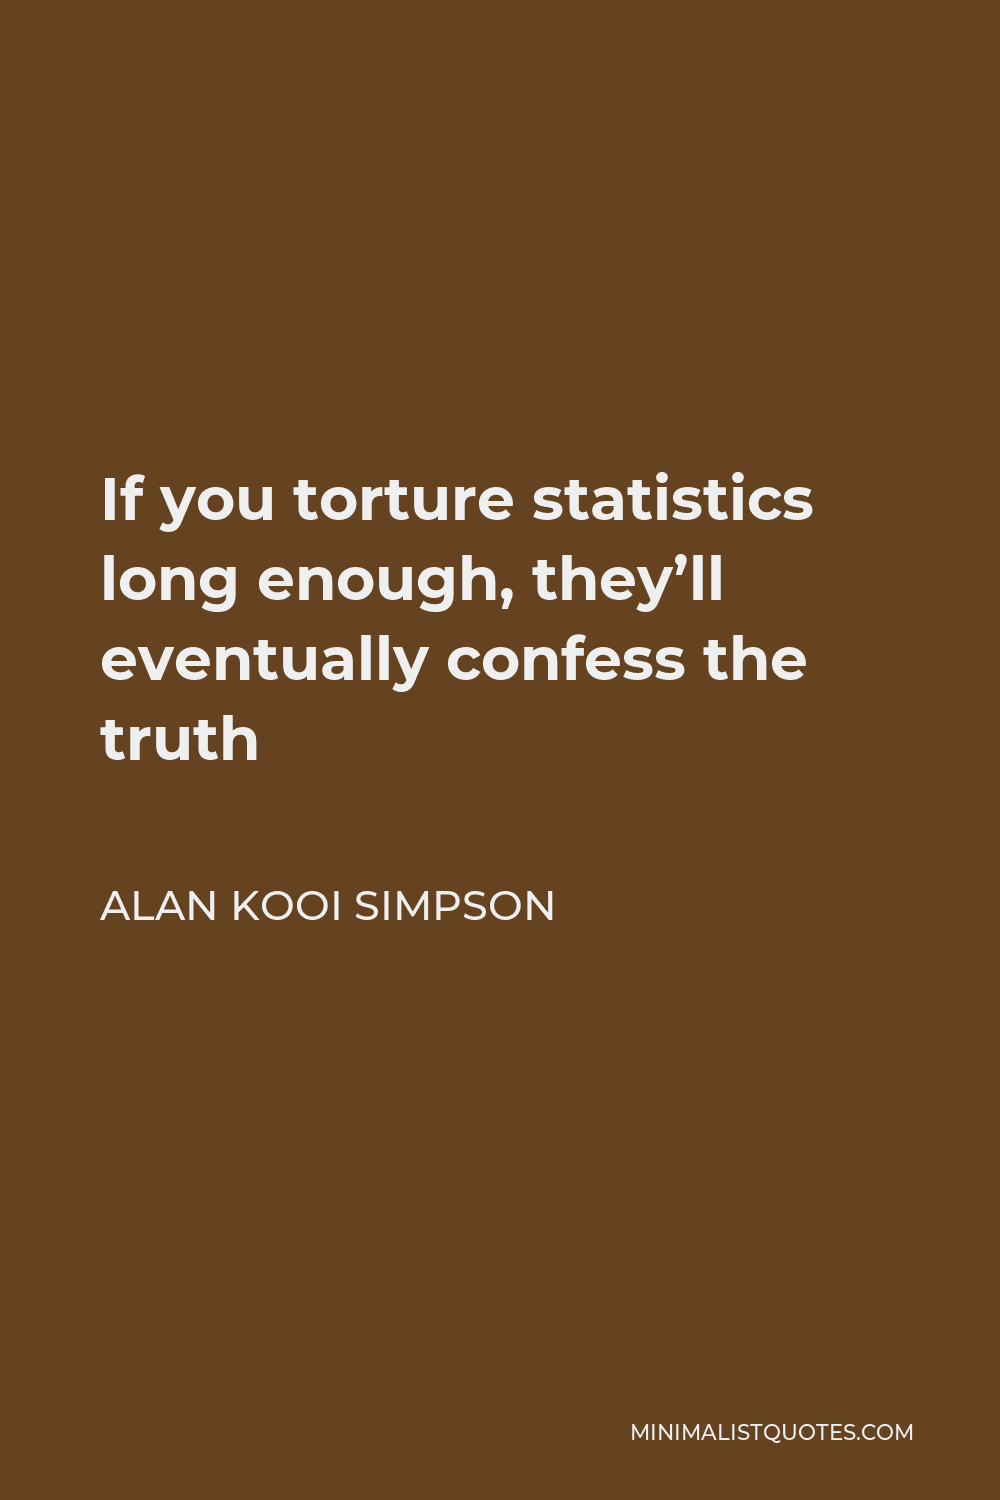 Alan Kooi Simpson Quote - If you torture statistics long enough, they’ll eventually confess the truth